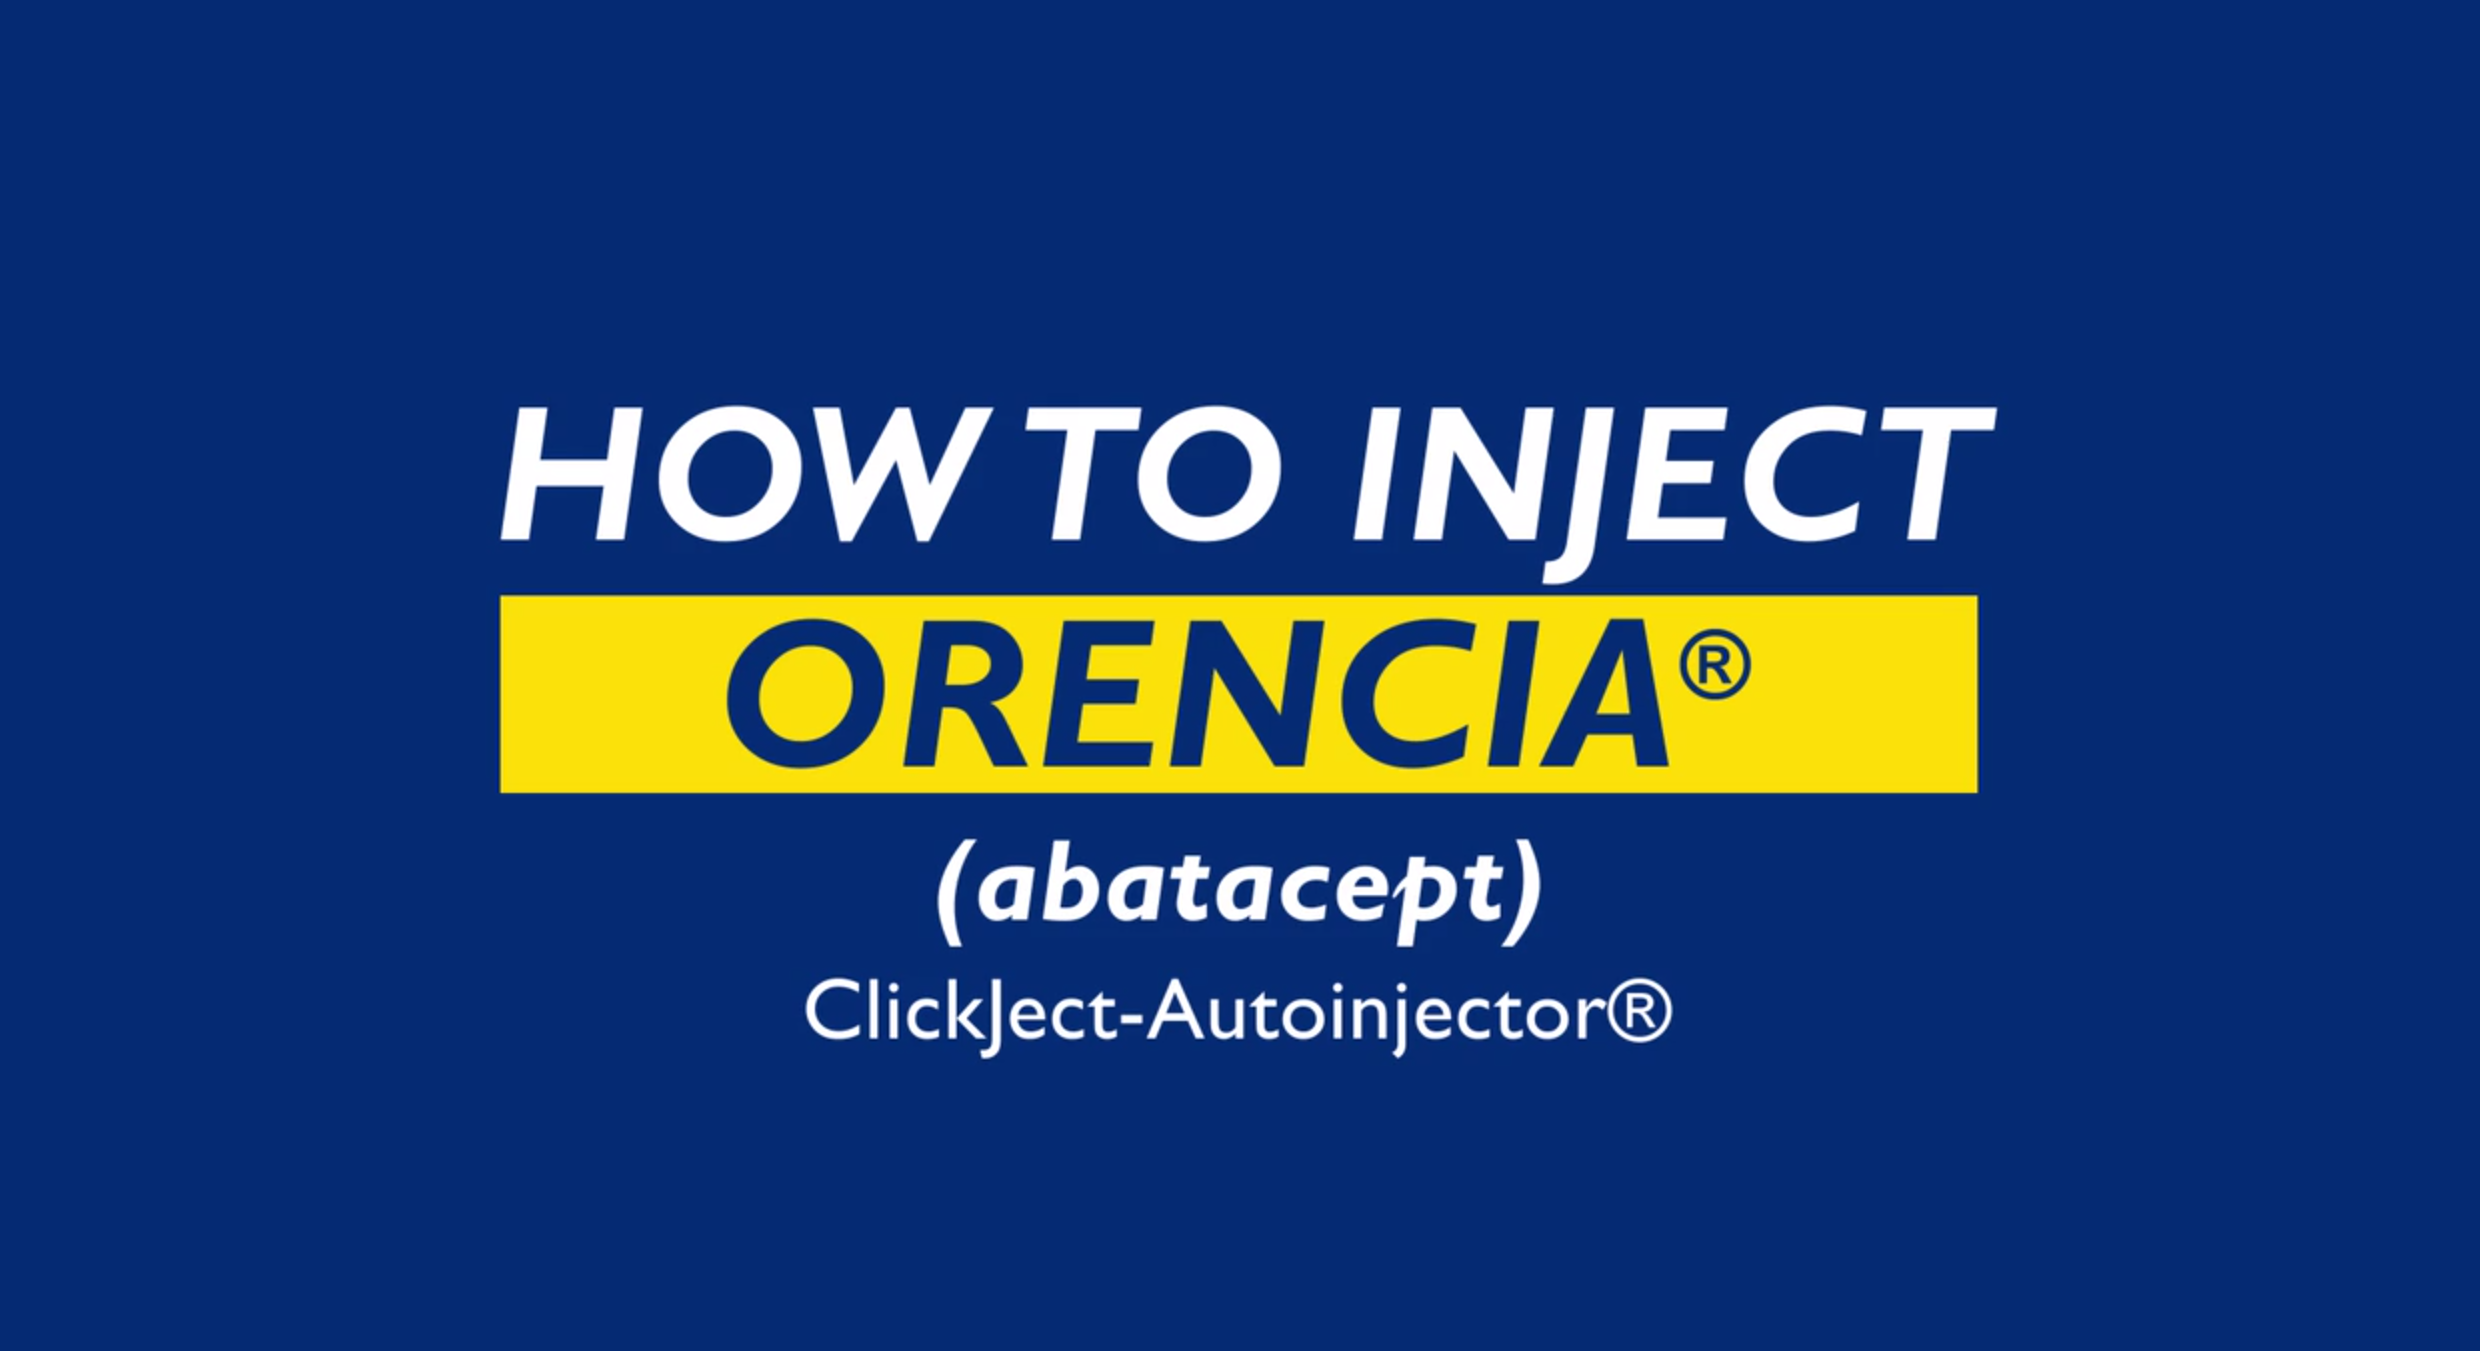 How to Inject Orencia ClickJect-Autoinjector (abatacept)